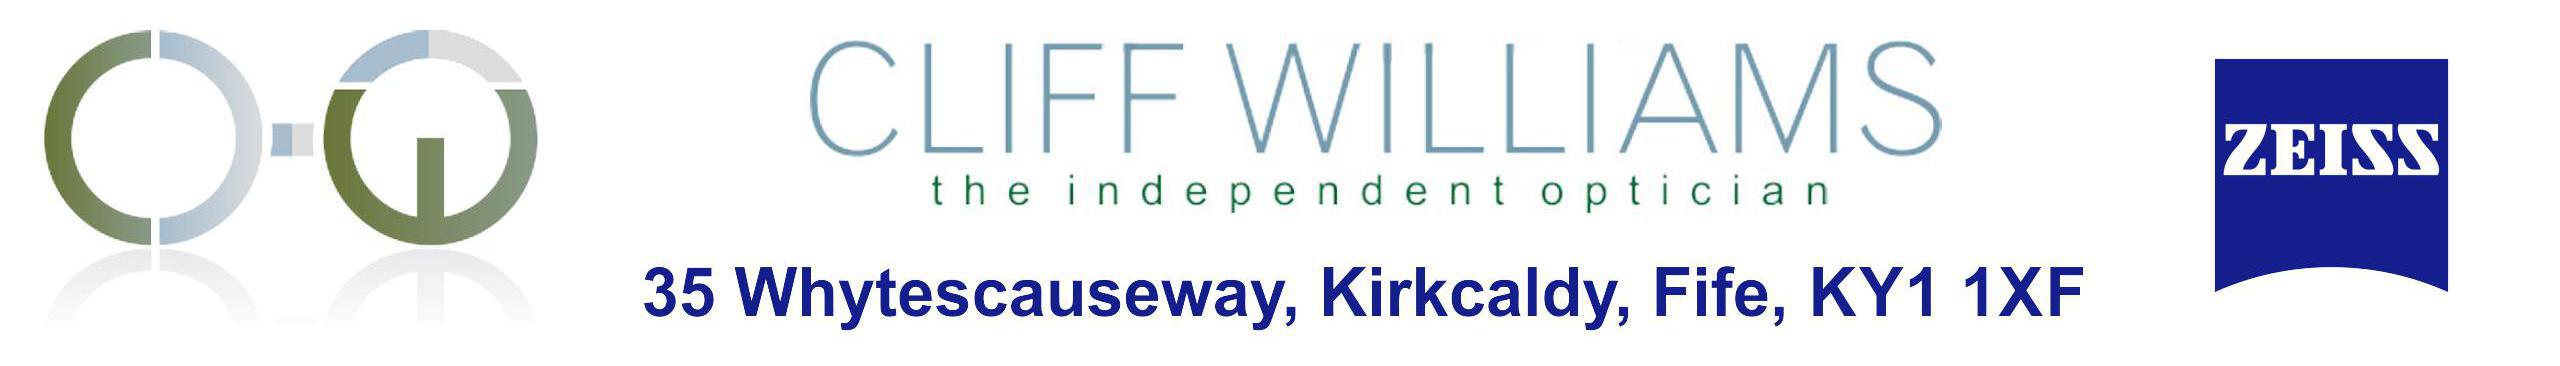 Cliff Williams Independent Optician 35 Whytescauseway, Kirkcaldy, Fife, KY1 1XF Telephone +4401592642422 email cliff@cliffwilliams.co.uk